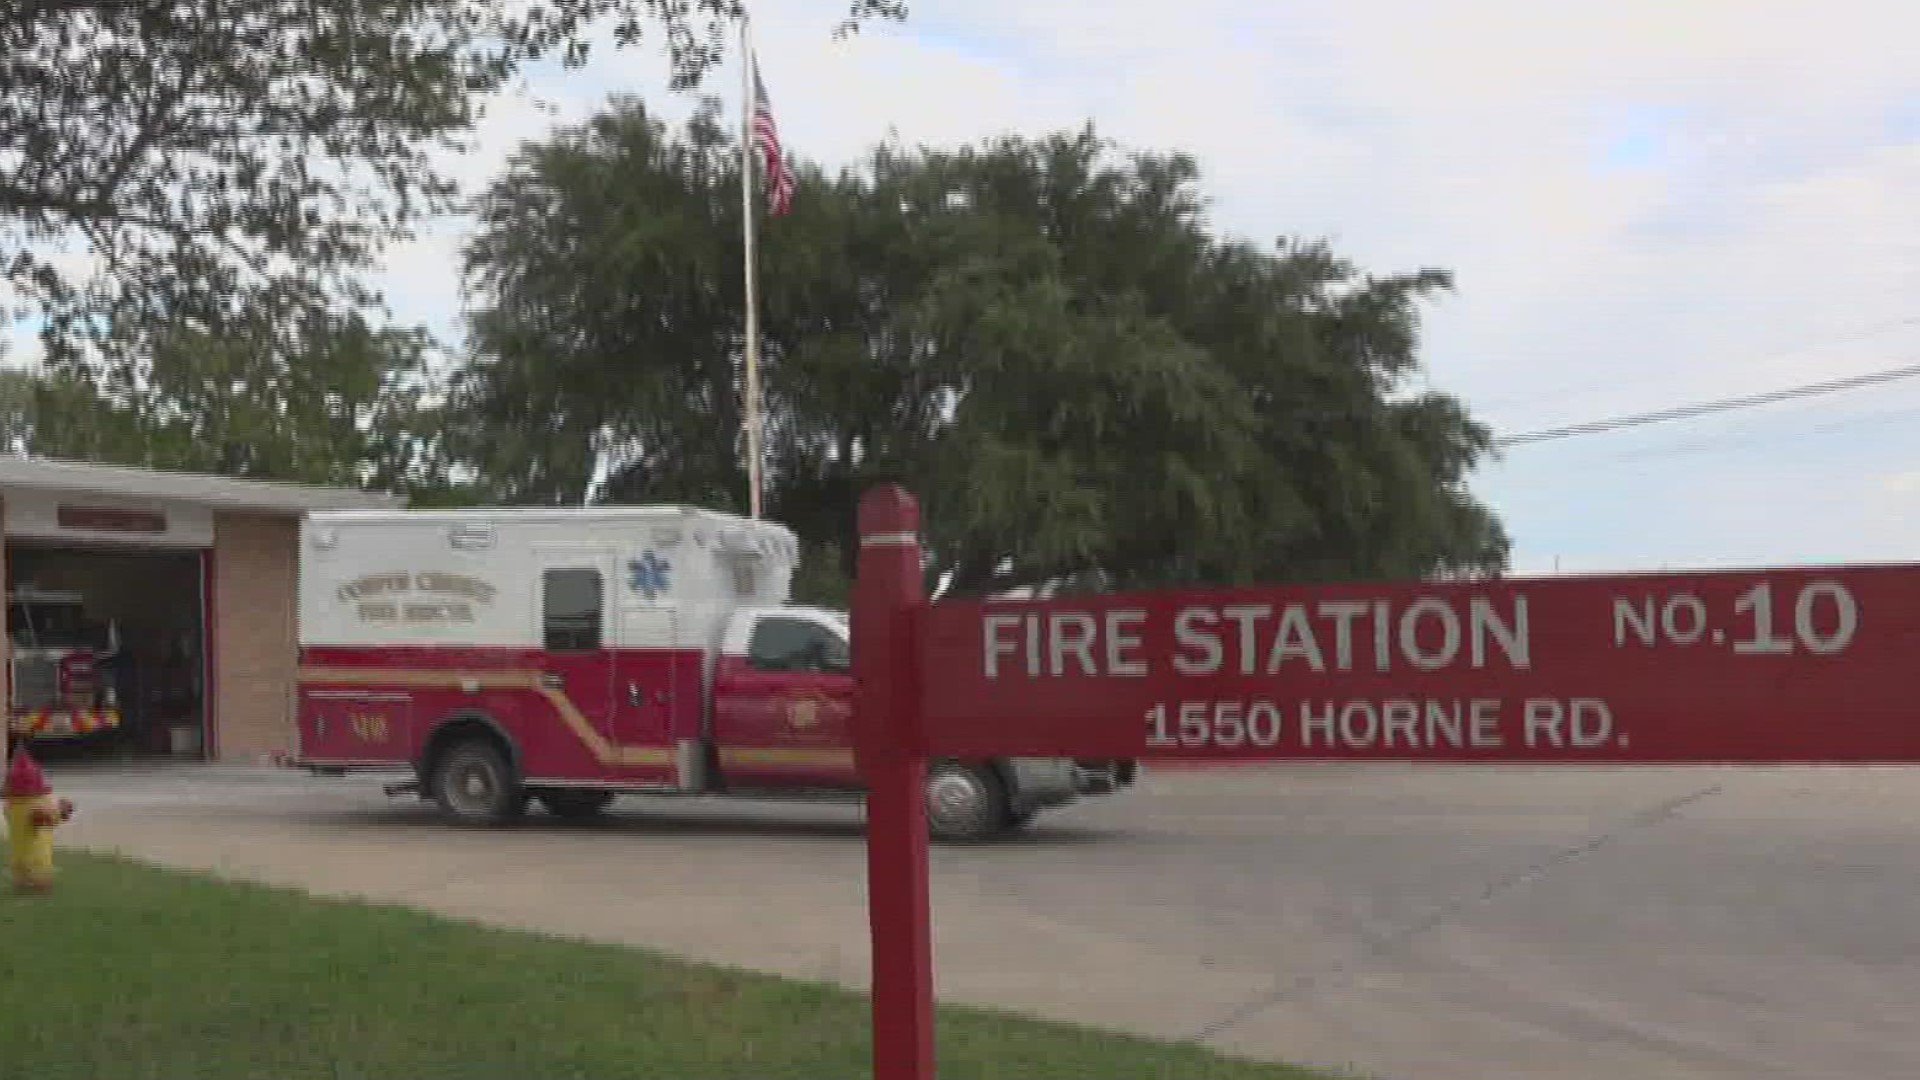 Corpus Christi Fire Station No. 10 is one of many buildings that could benefit from Prop 'C' on Novembers ballot.